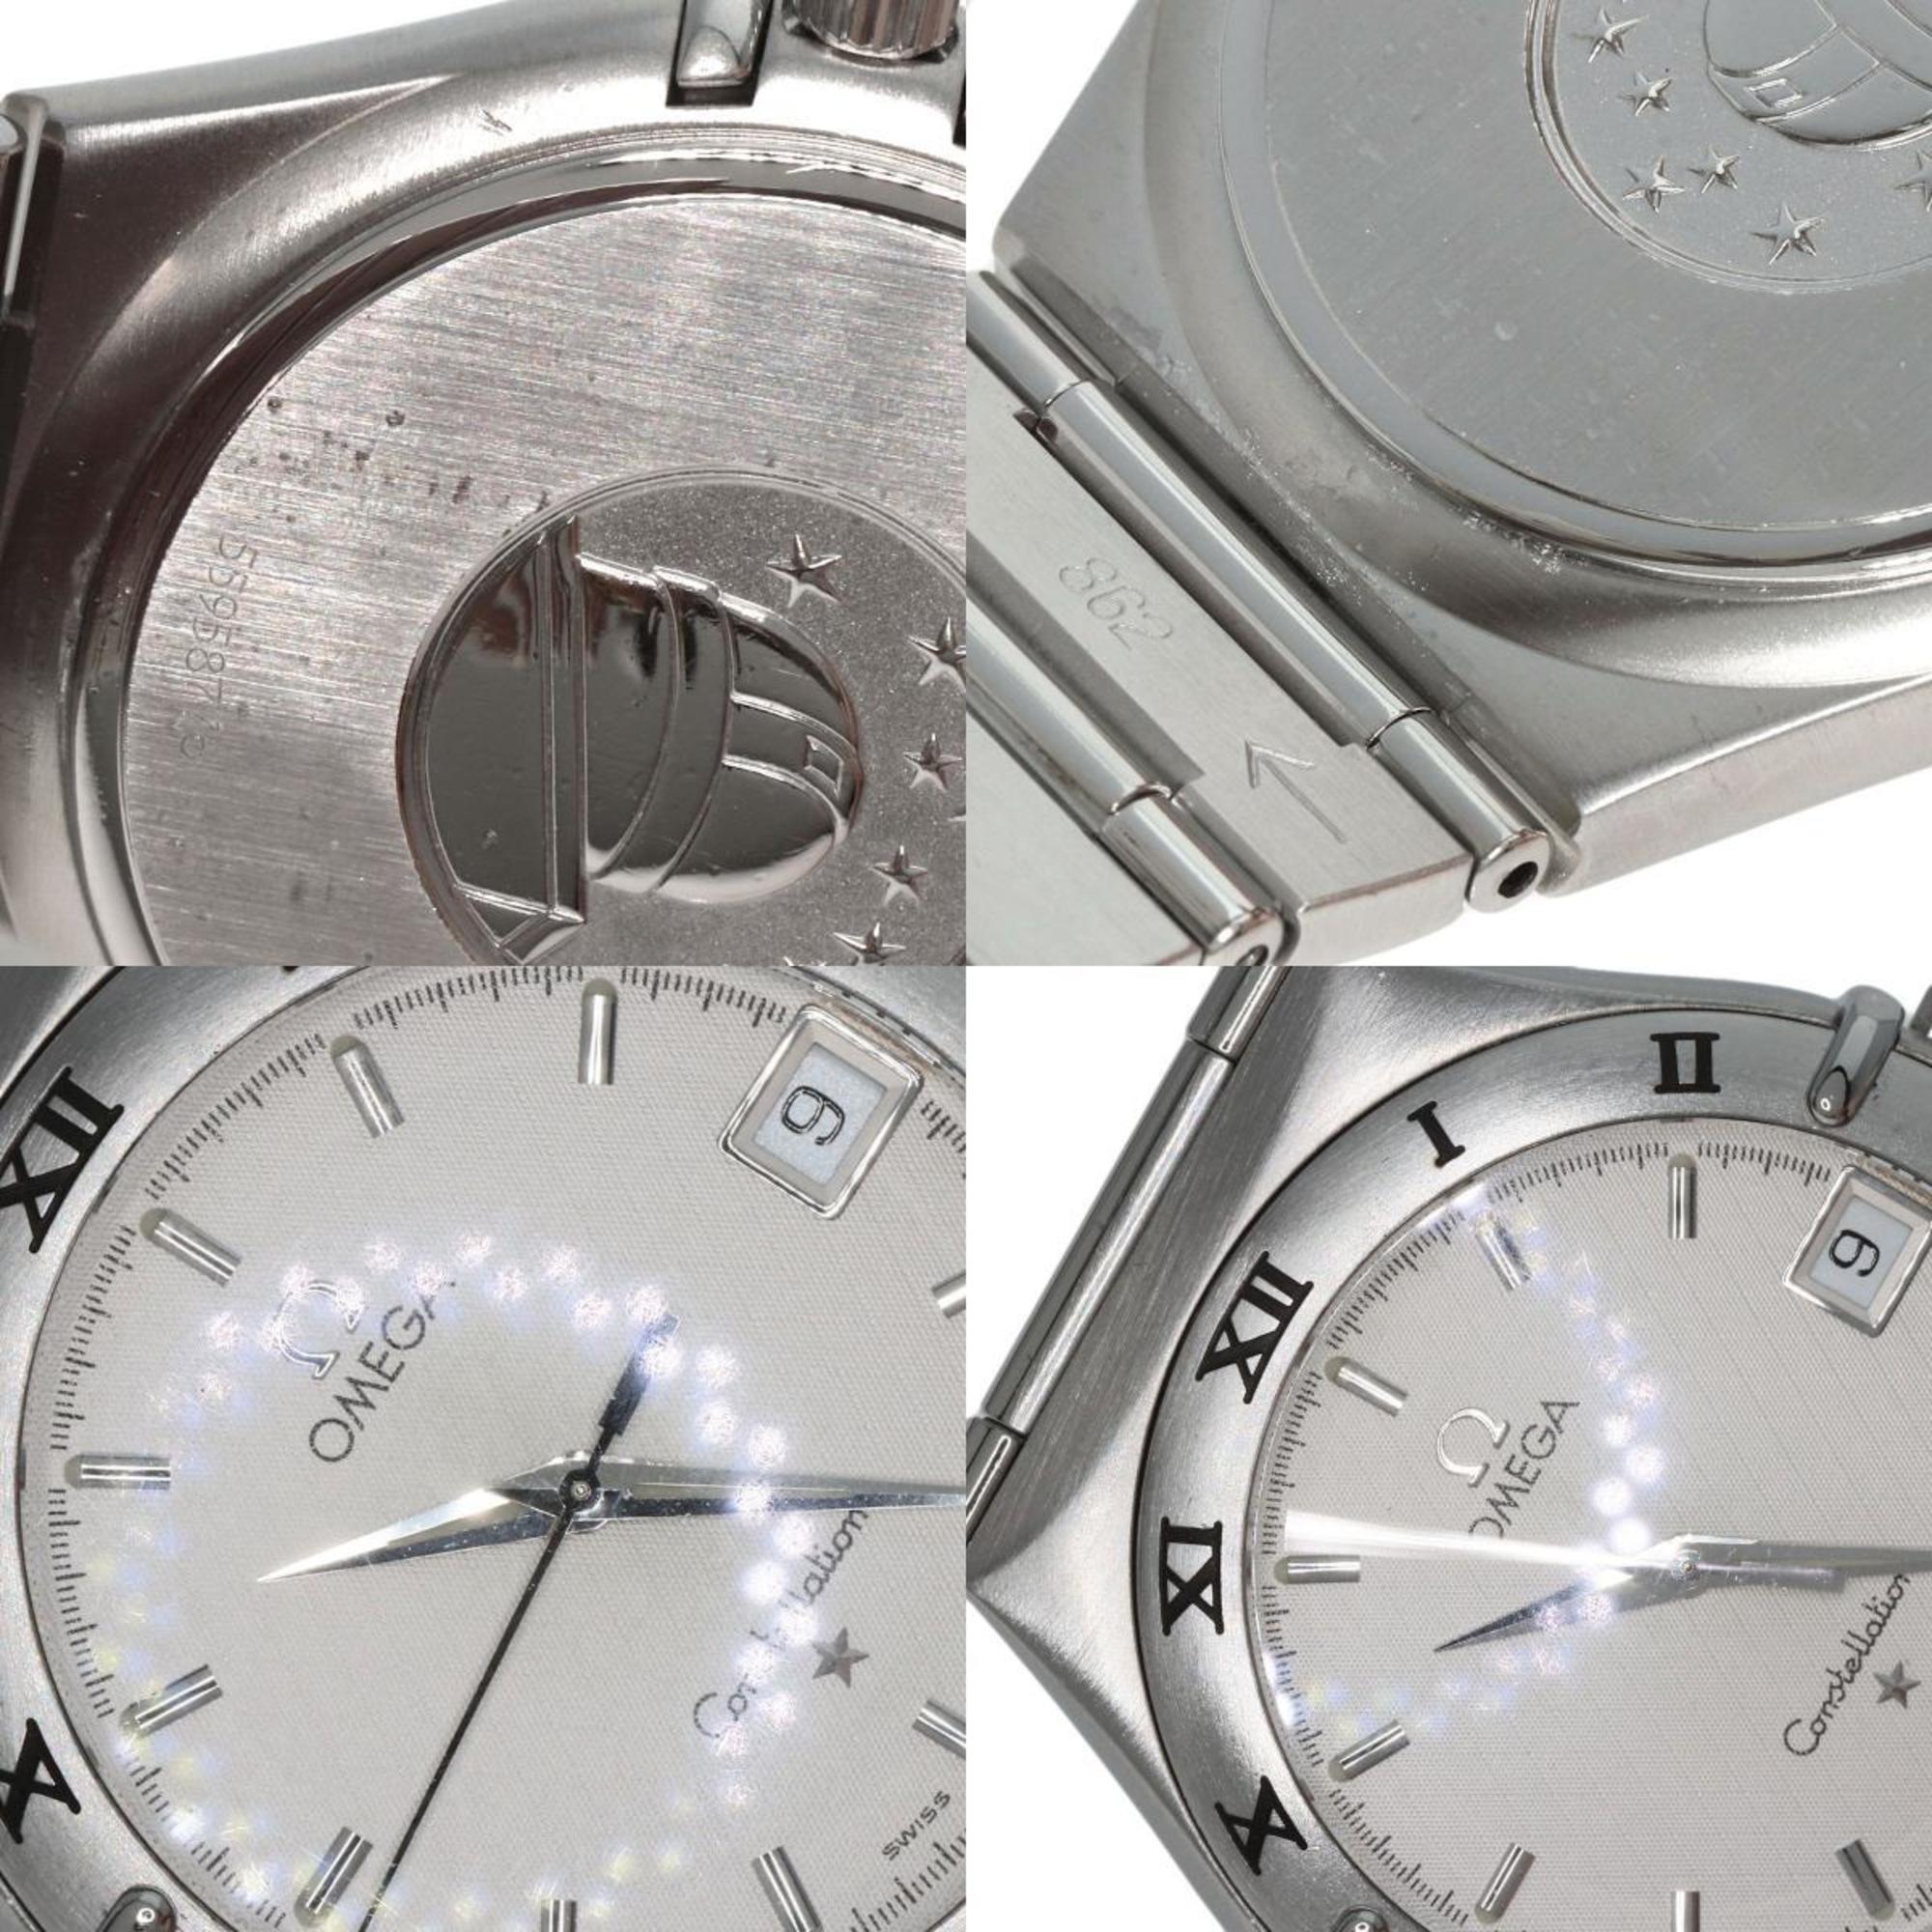 OMEGA 1512.30 Constellation Watch Stainless Steel SS Men's